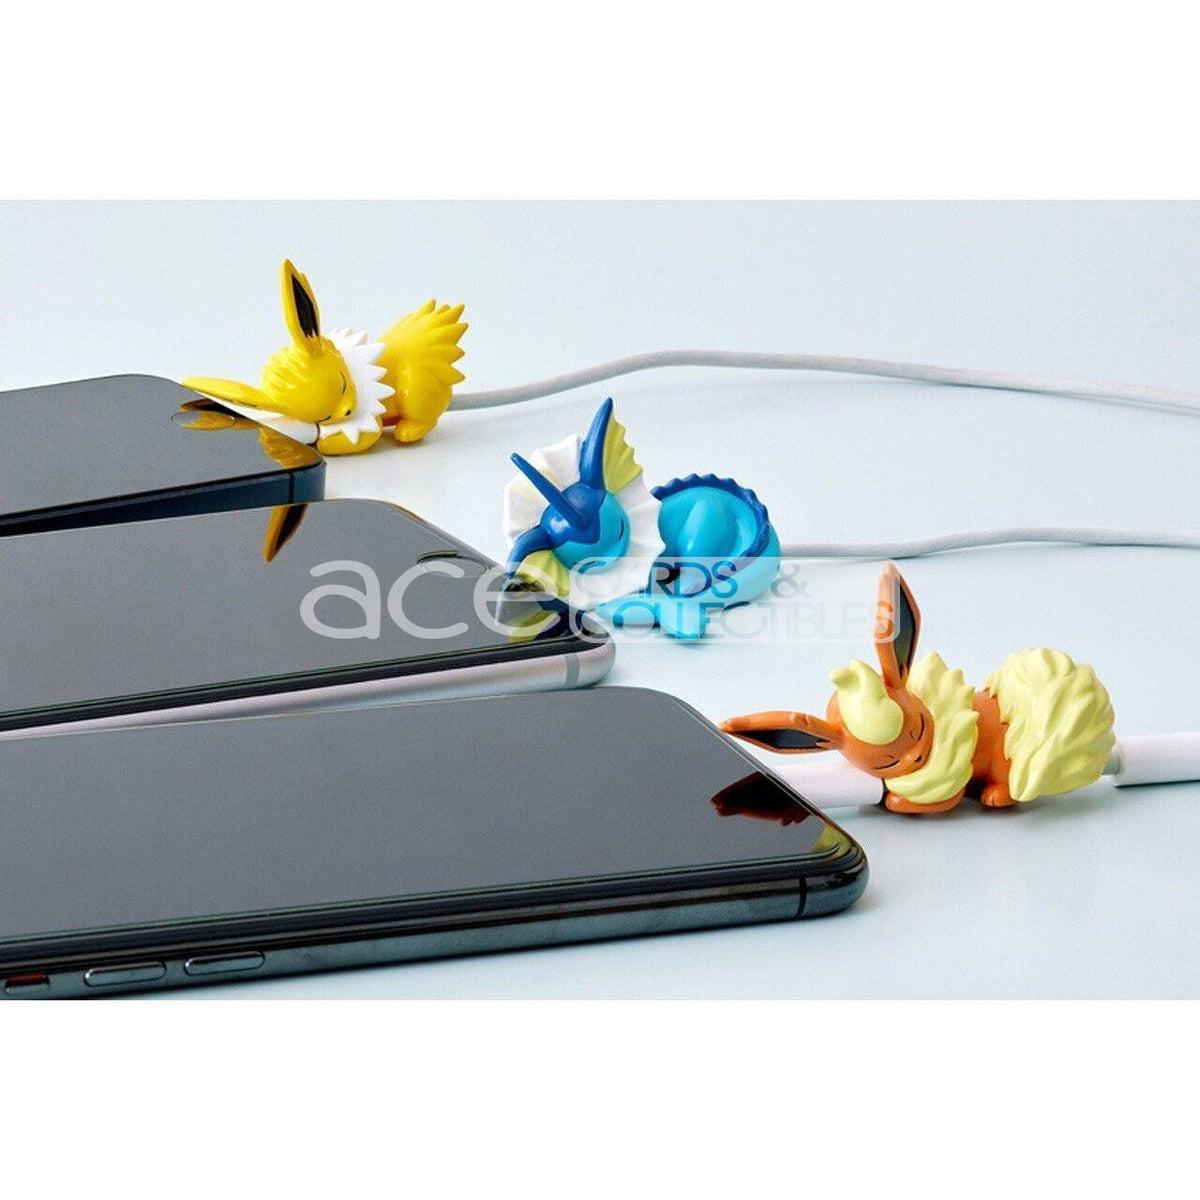 Pokémon (Pocket Monsters) Sleep On The Cable Vol. 3-Gray Parker Service-Ace Cards &amp; Collectibles